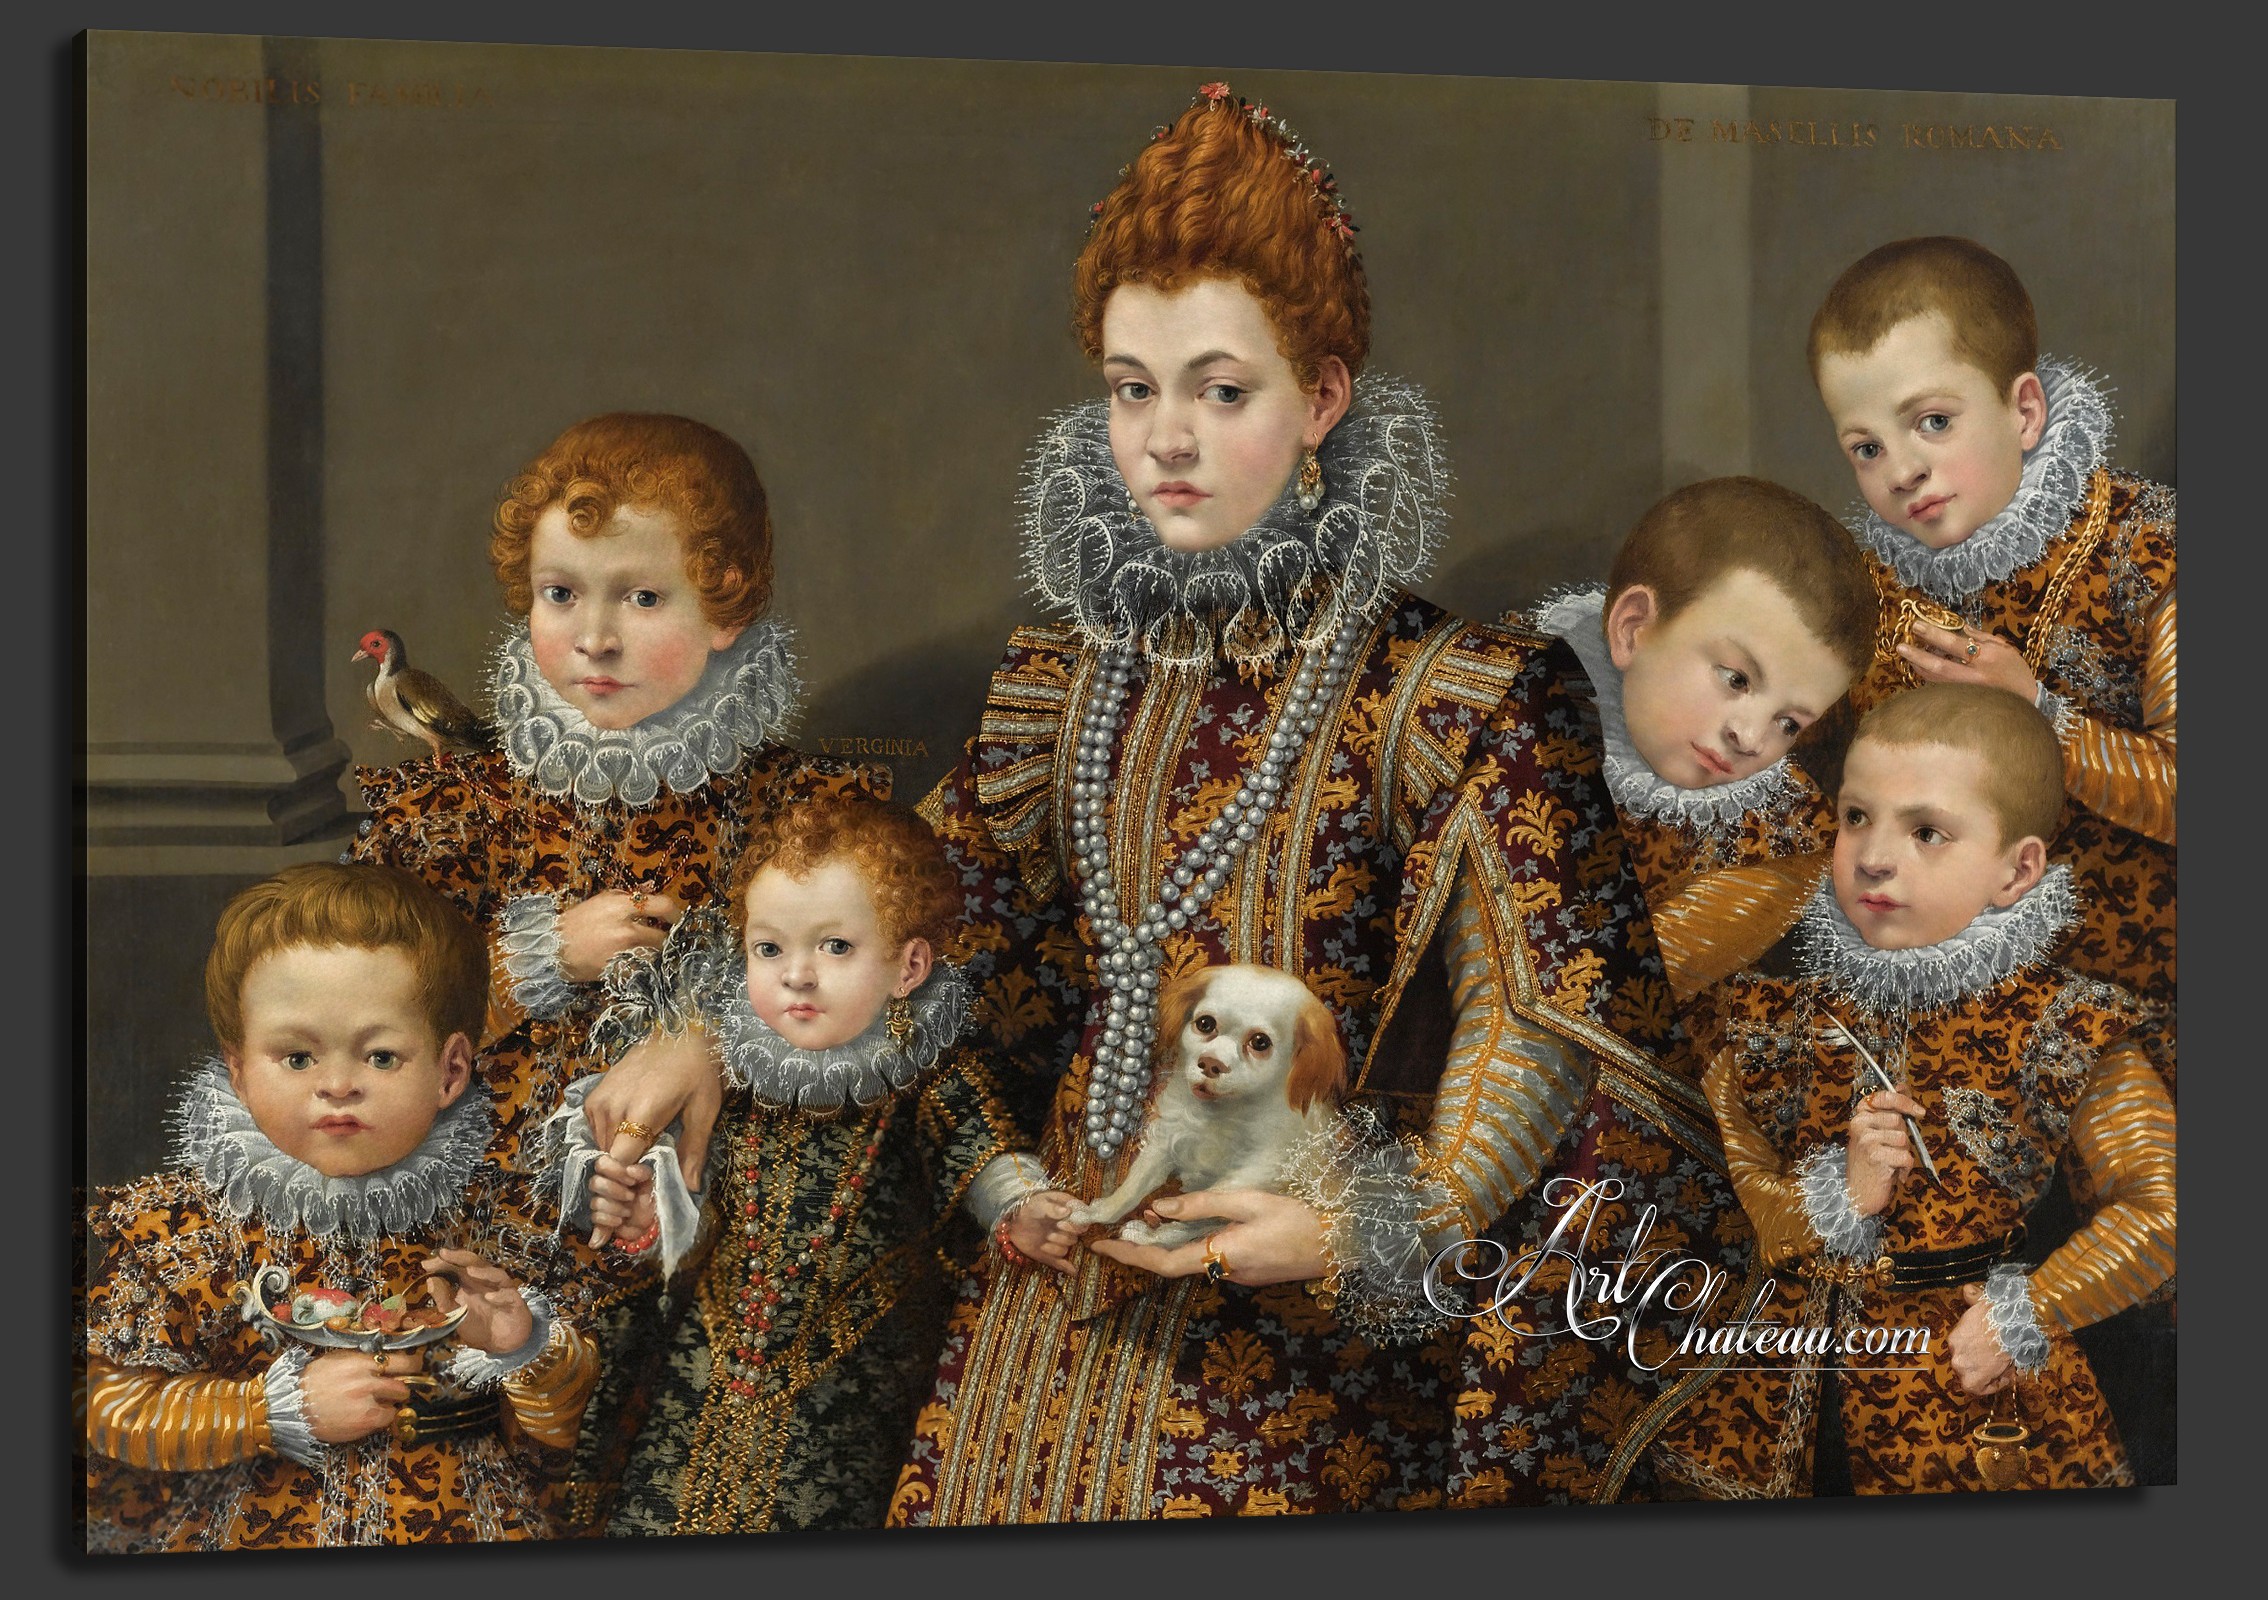 Bianca Maselli with her six Children, after Livinia Fontana